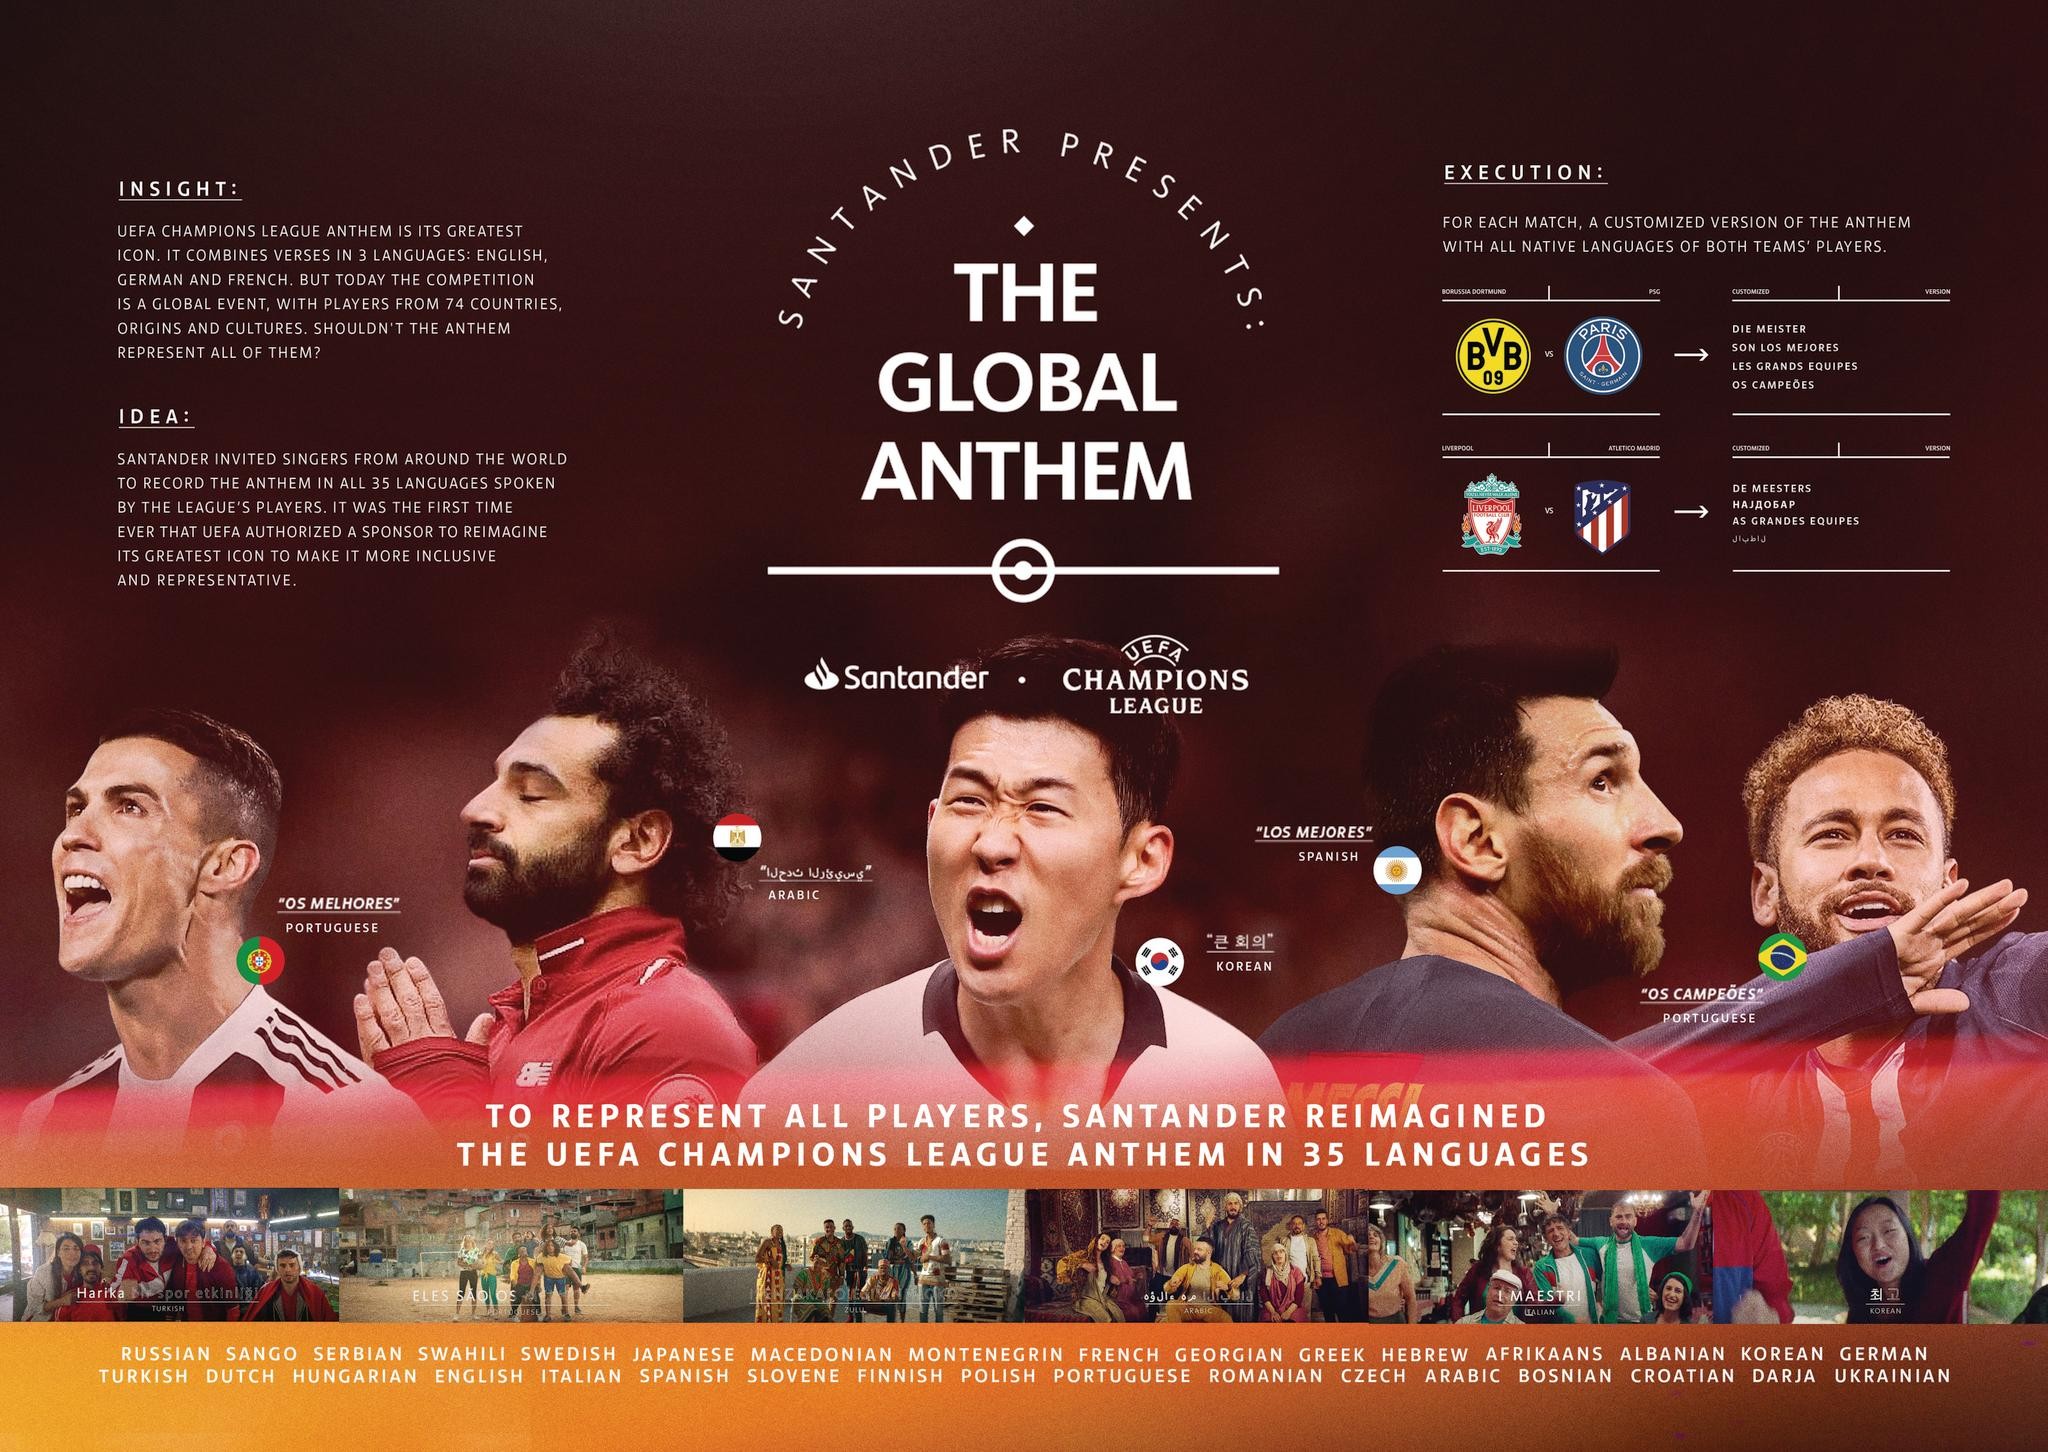 THE UEFA CHAMPIONS LEAGUE`S GLOBAL ANTHEM